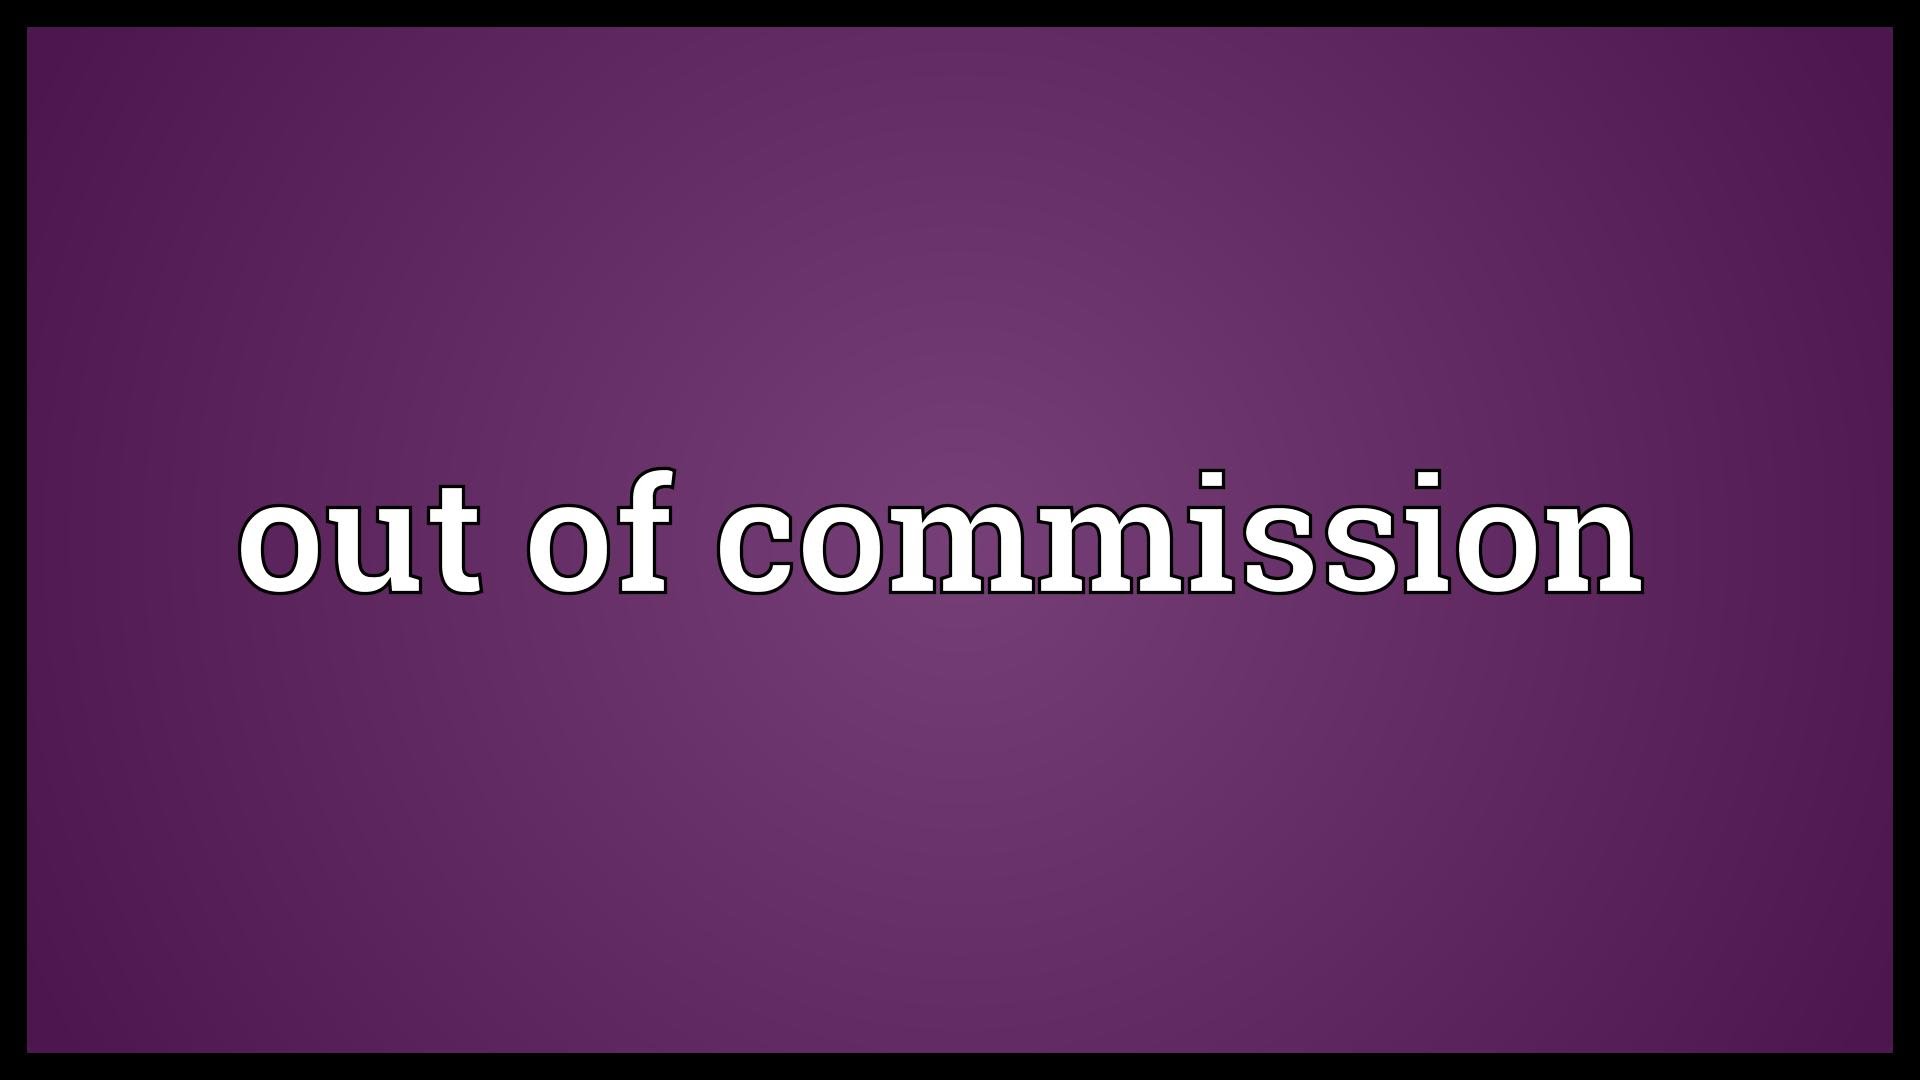 Out of commission Meaning - YouTube